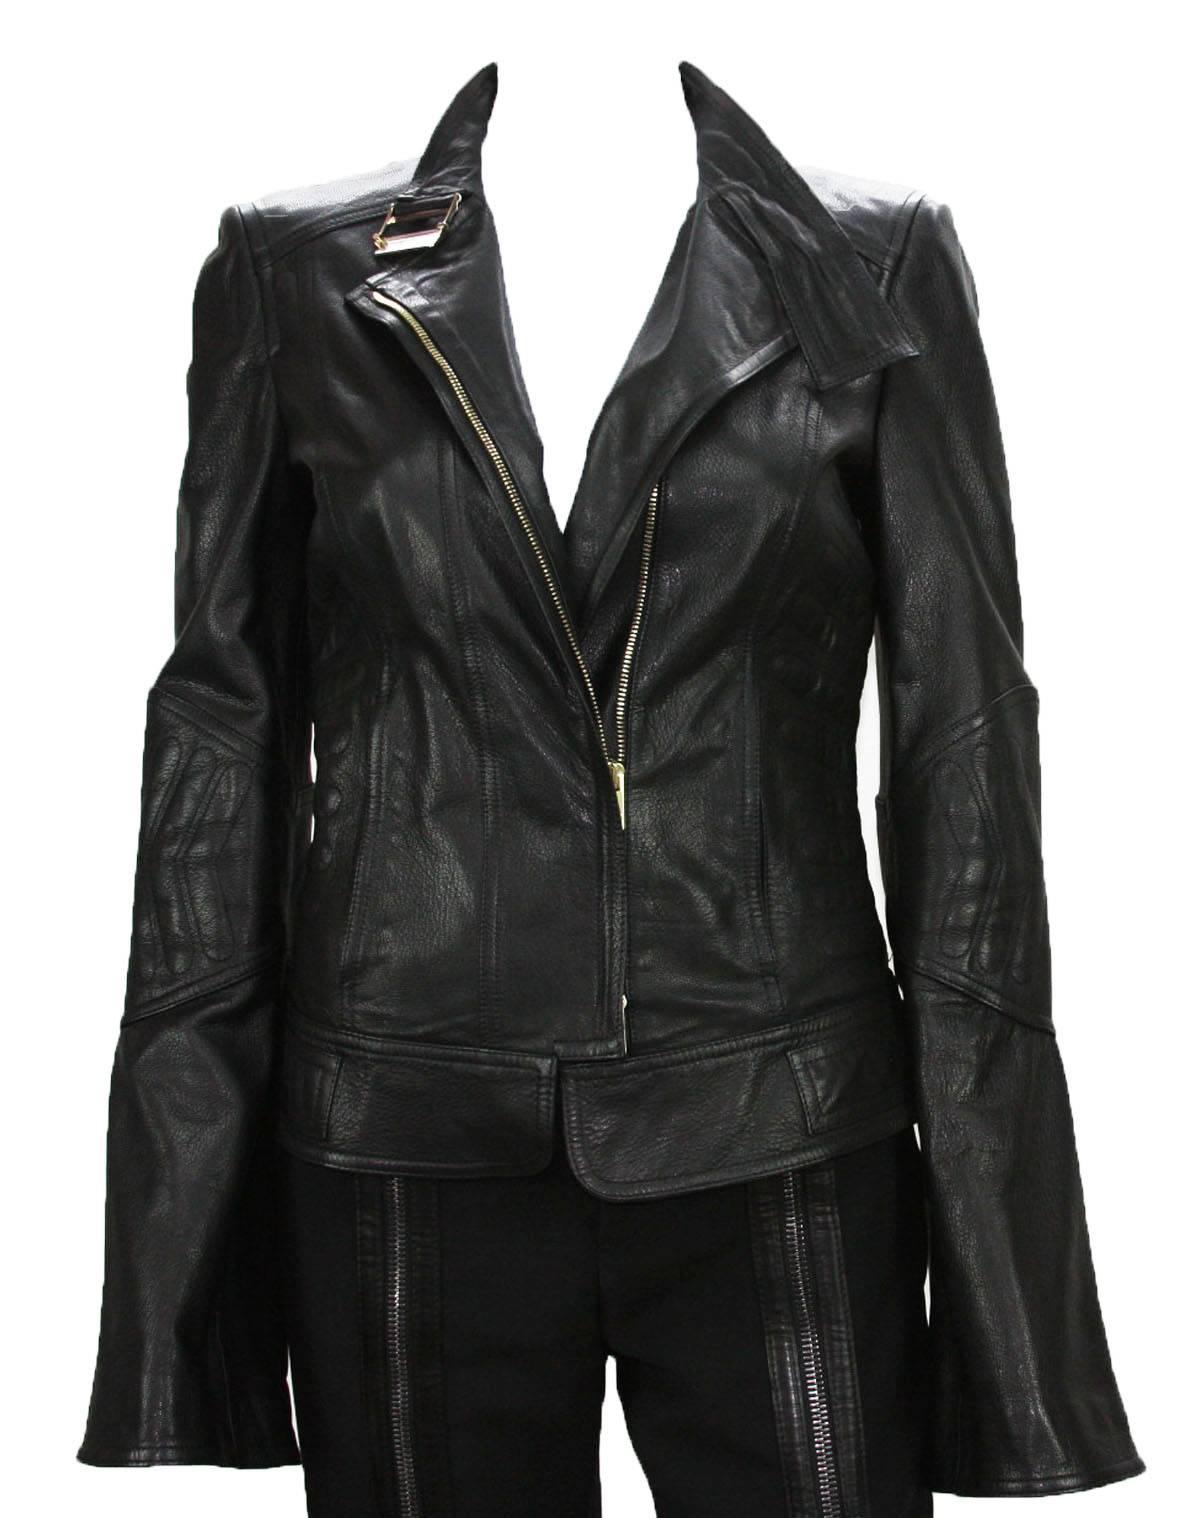 TOM FORD for GUCCI Black Leather Jacket
Italian Size 40 - US 4
2004 Collection
100% Leather, Black Color, Chevron Pattern, Zip Closure.
Two Side Pockets, Zip Cuffs on Sleeves, Adjustable Side Straps.
Measurements: Length - 21 inch, Bust - 32